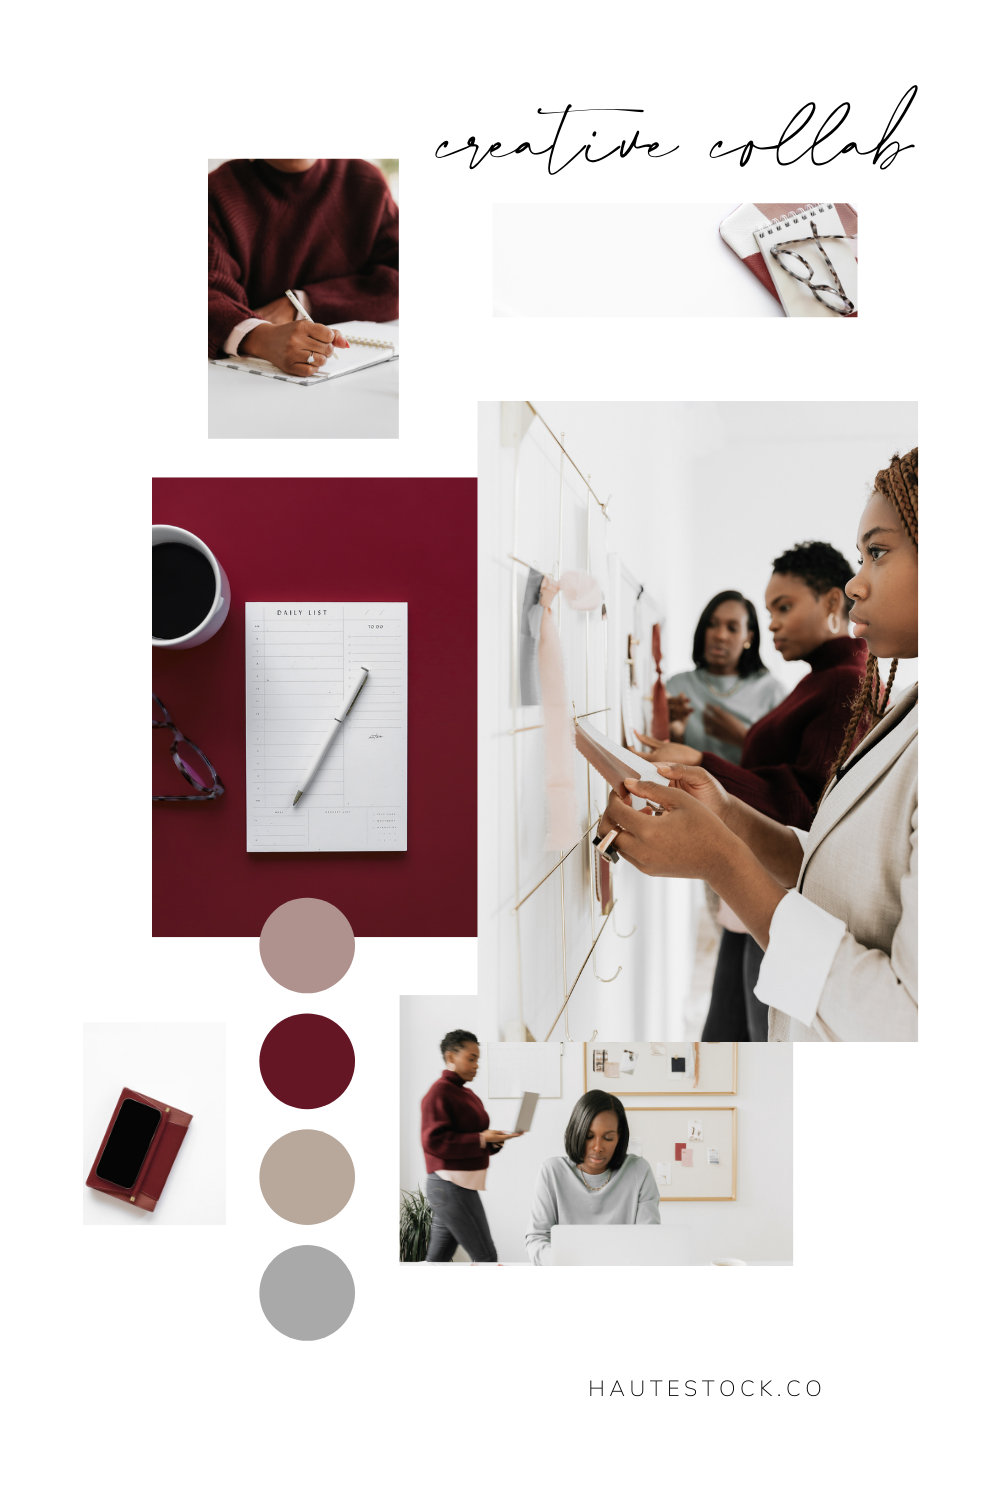 Styled stock images of women collaborating, workspace flatlays, women creative planing and tech mockups in a burgundy, grey and dusty pink colors.